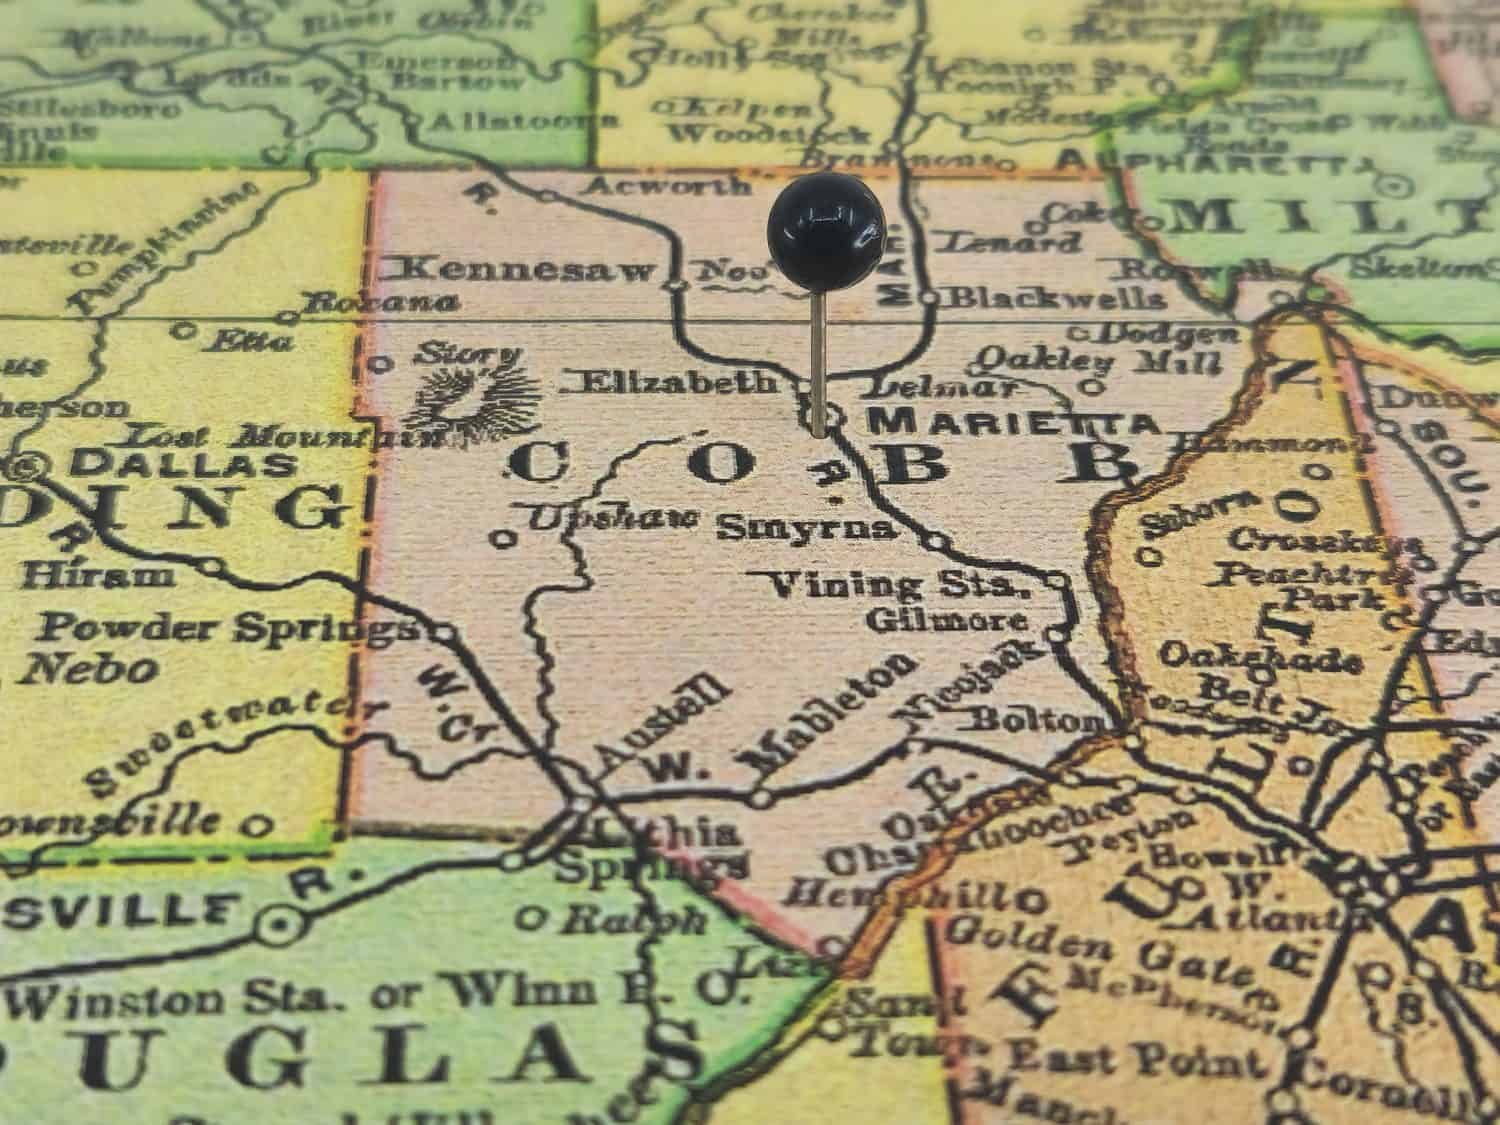 Cobb County, Georgia marked by a black tack on a colorful vintage map. The county seat is located in the city of Marietta, GA.